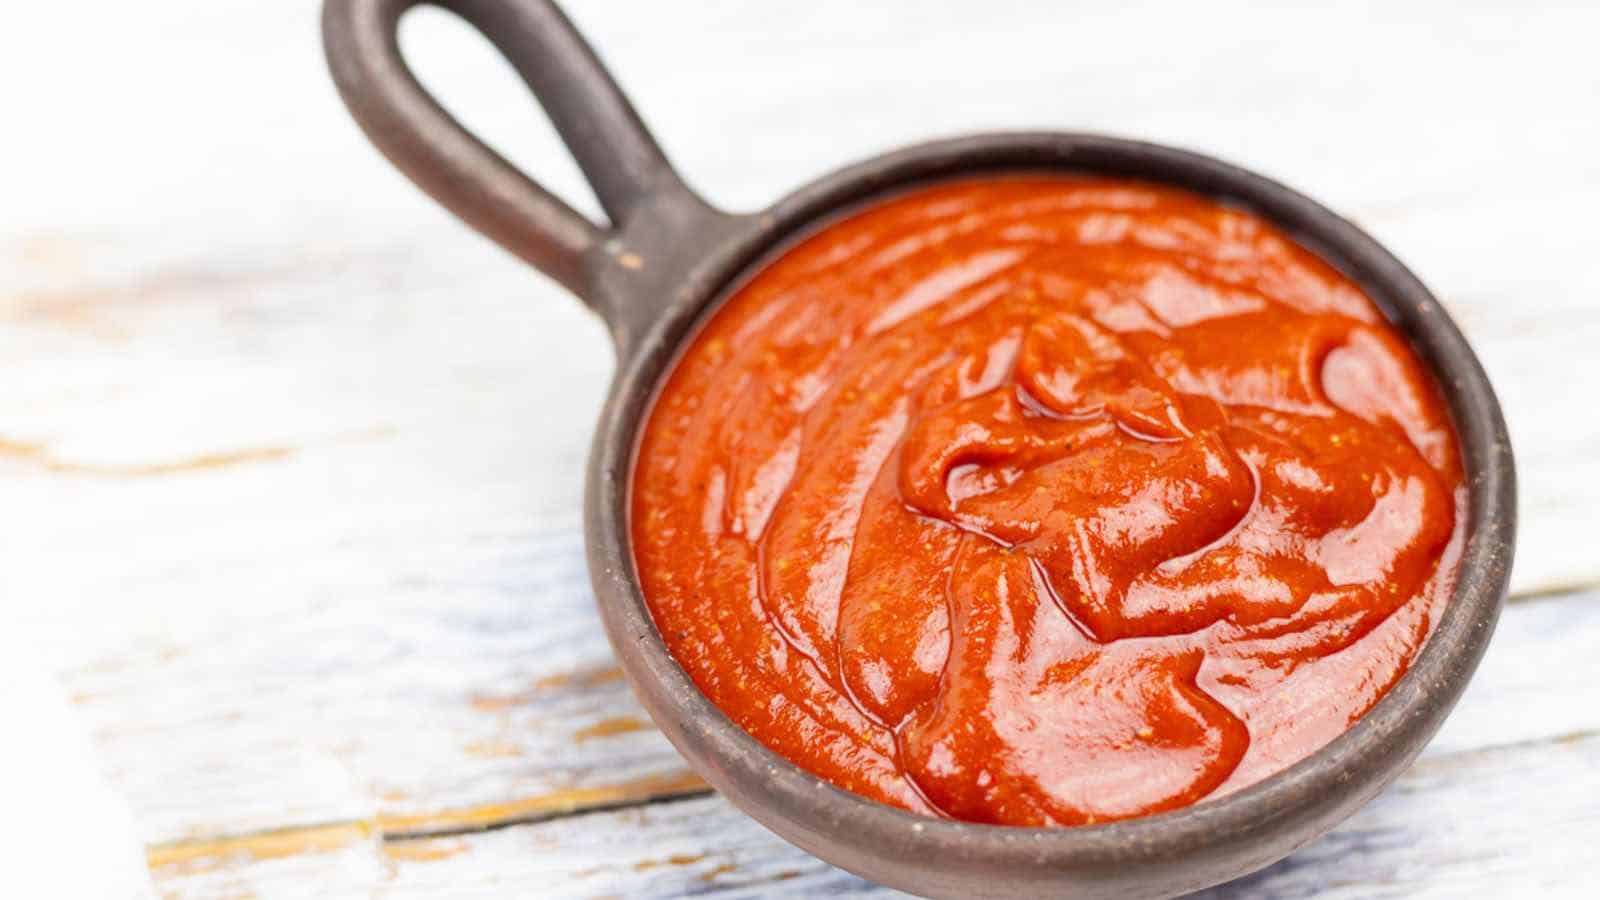 A close-up of a small, dark ceramic bowl filled with thick red BBQ sauce, on a rustic white wooden background.